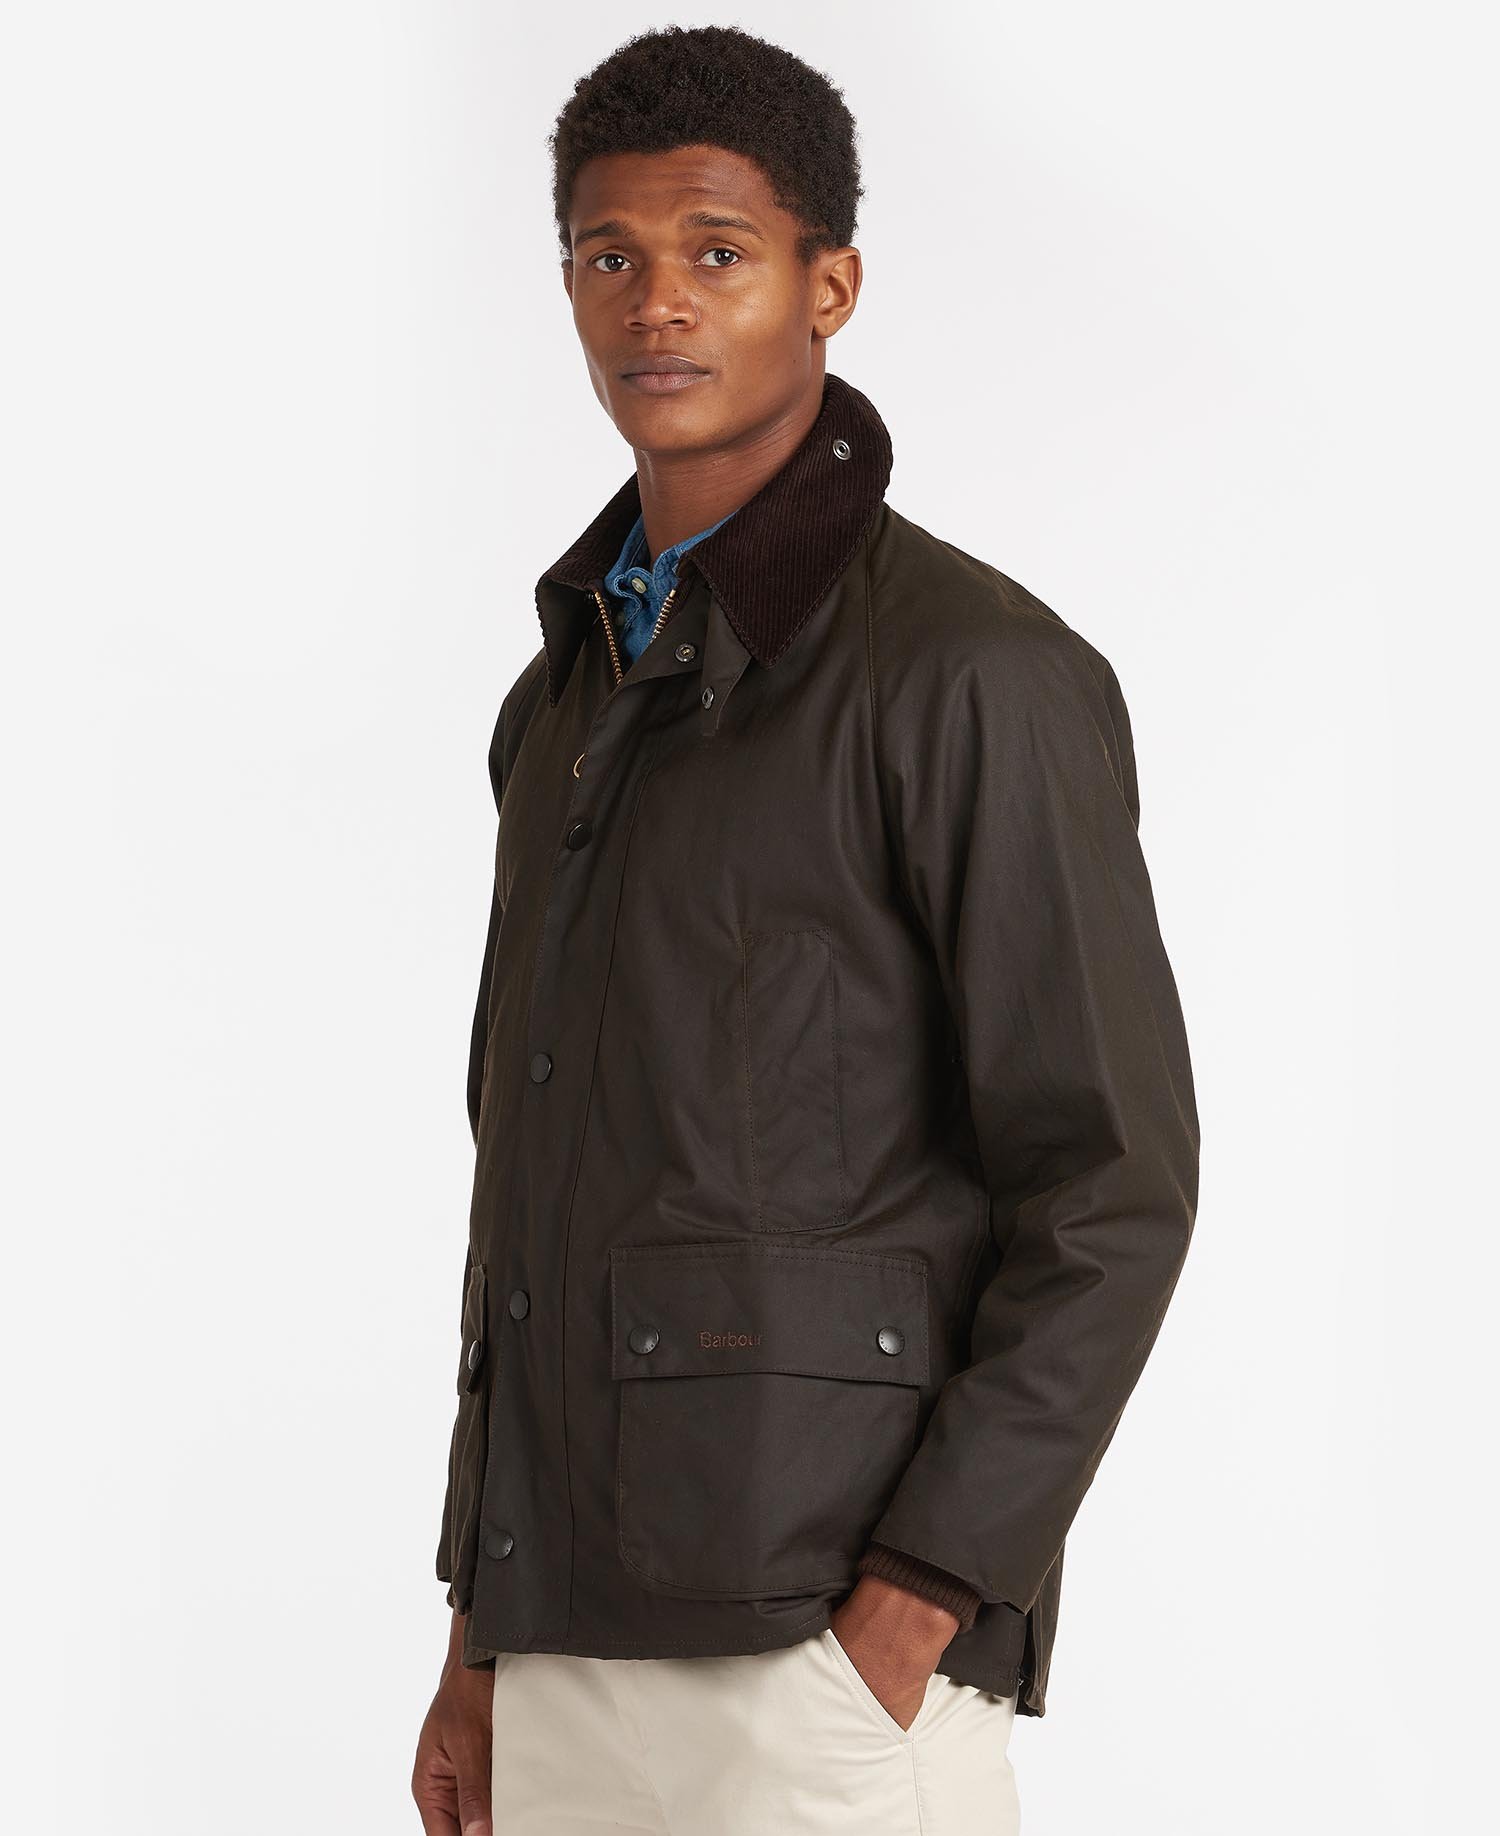 Classic Bedale Wax Jacket in Olive | Barbour